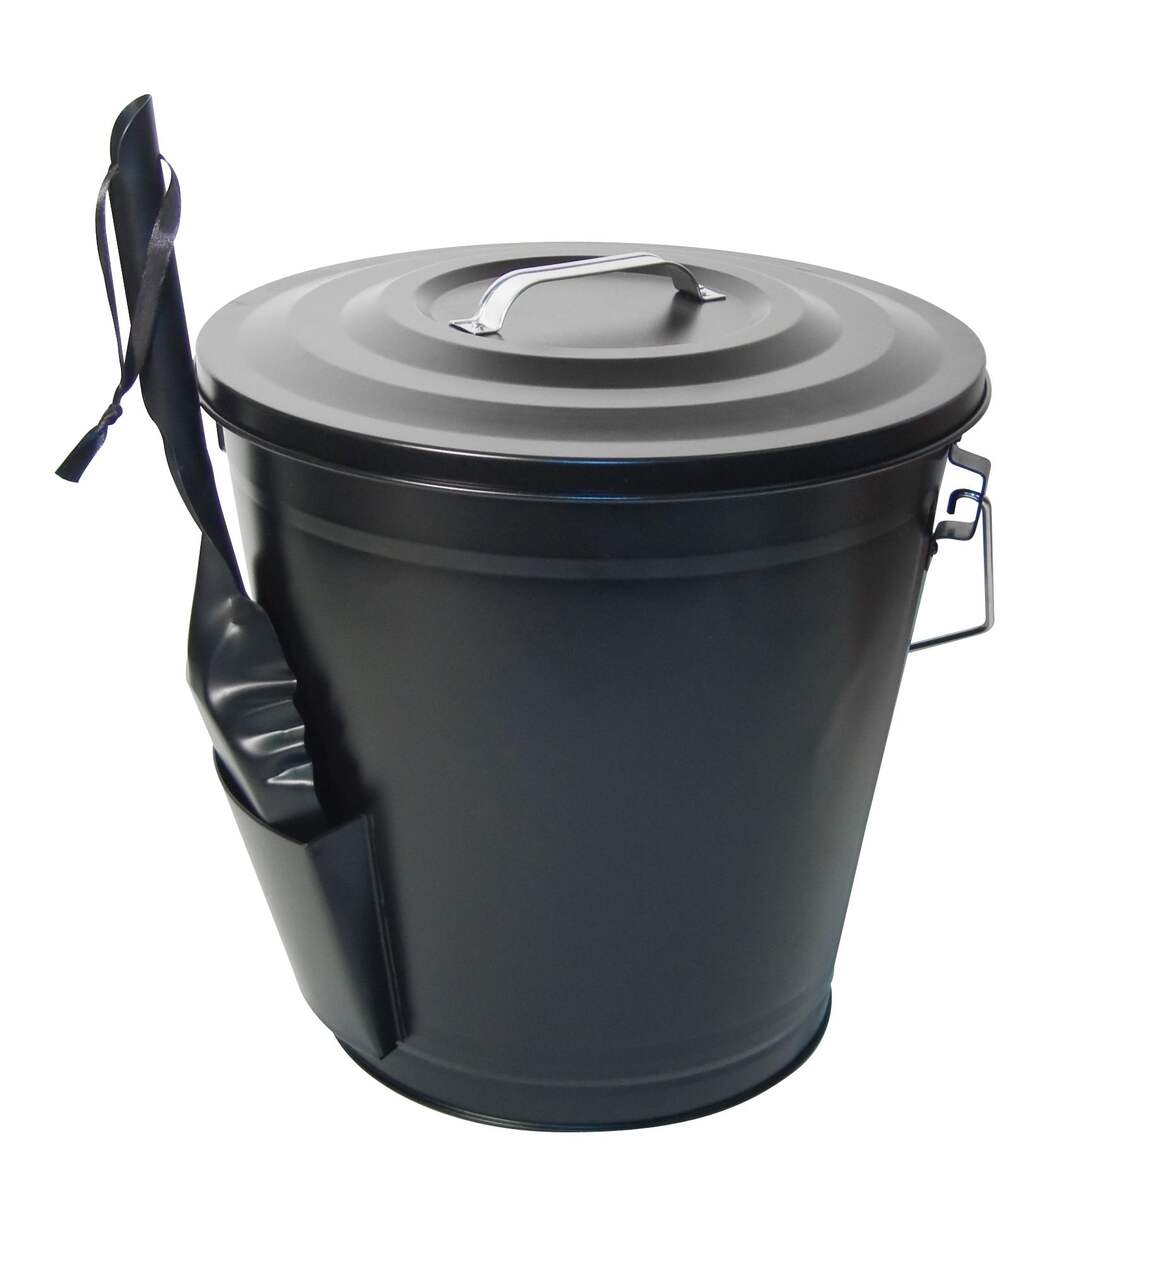 https://media-www.canadiantire.ca/product/fixing/home-environment/winter-climate-control/0641691/ash-bucket-ed346c8e-f715-4b42-a64a-5f5163092ea9-jpgrendition.jpg?imdensity=1&imwidth=640&impolicy=mZoom